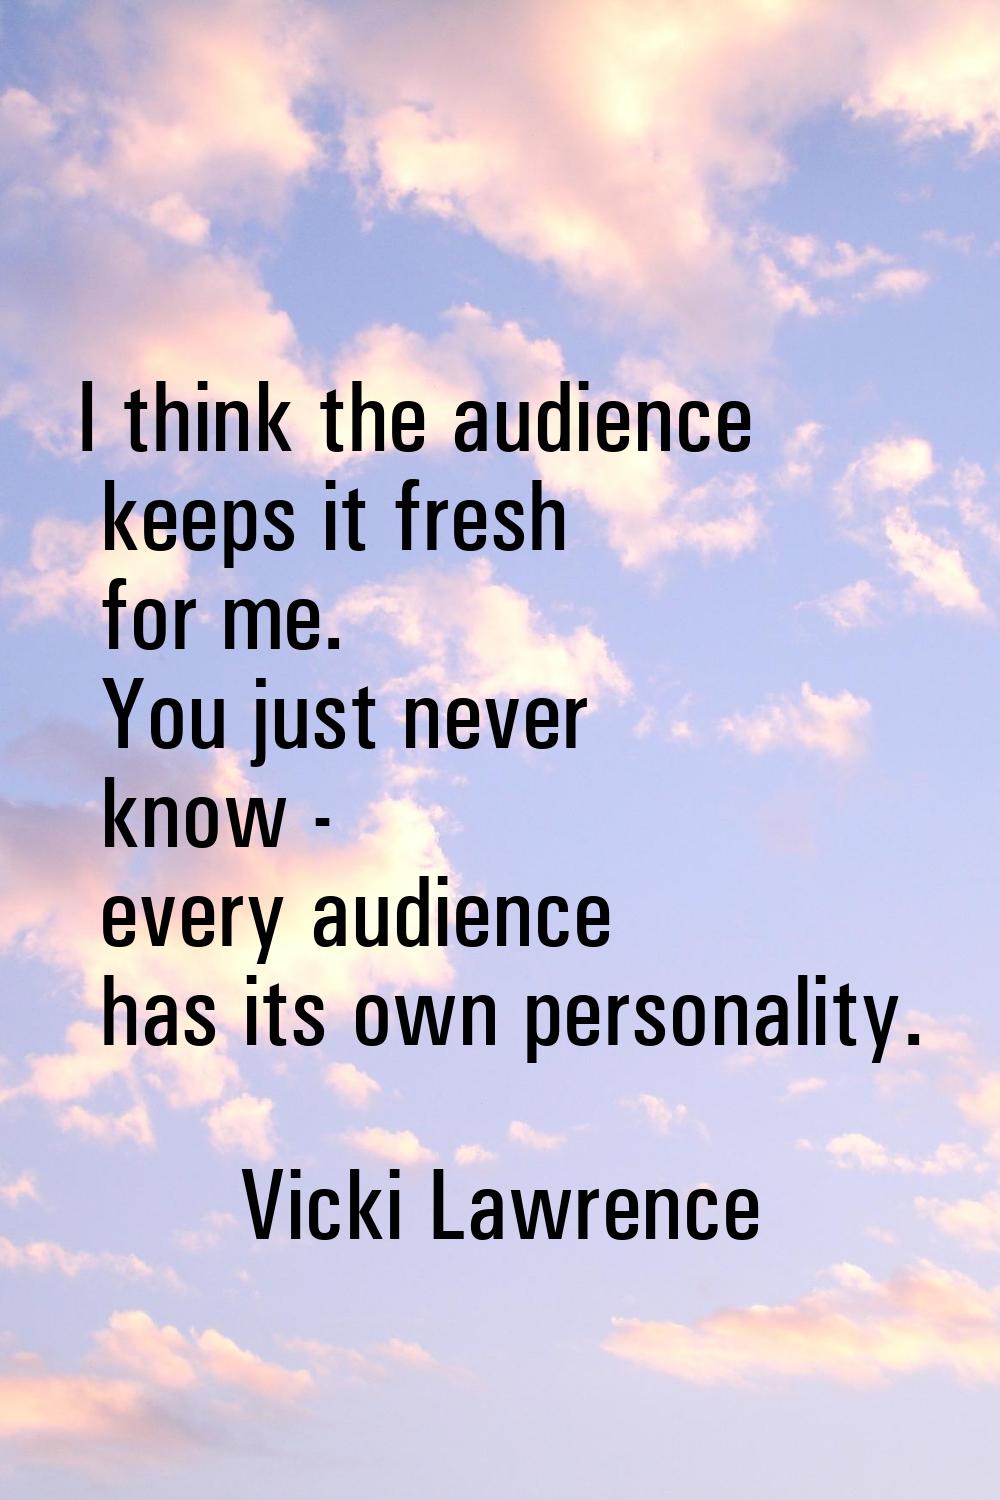 I think the audience keeps it fresh for me. You just never know - every audience has its own person